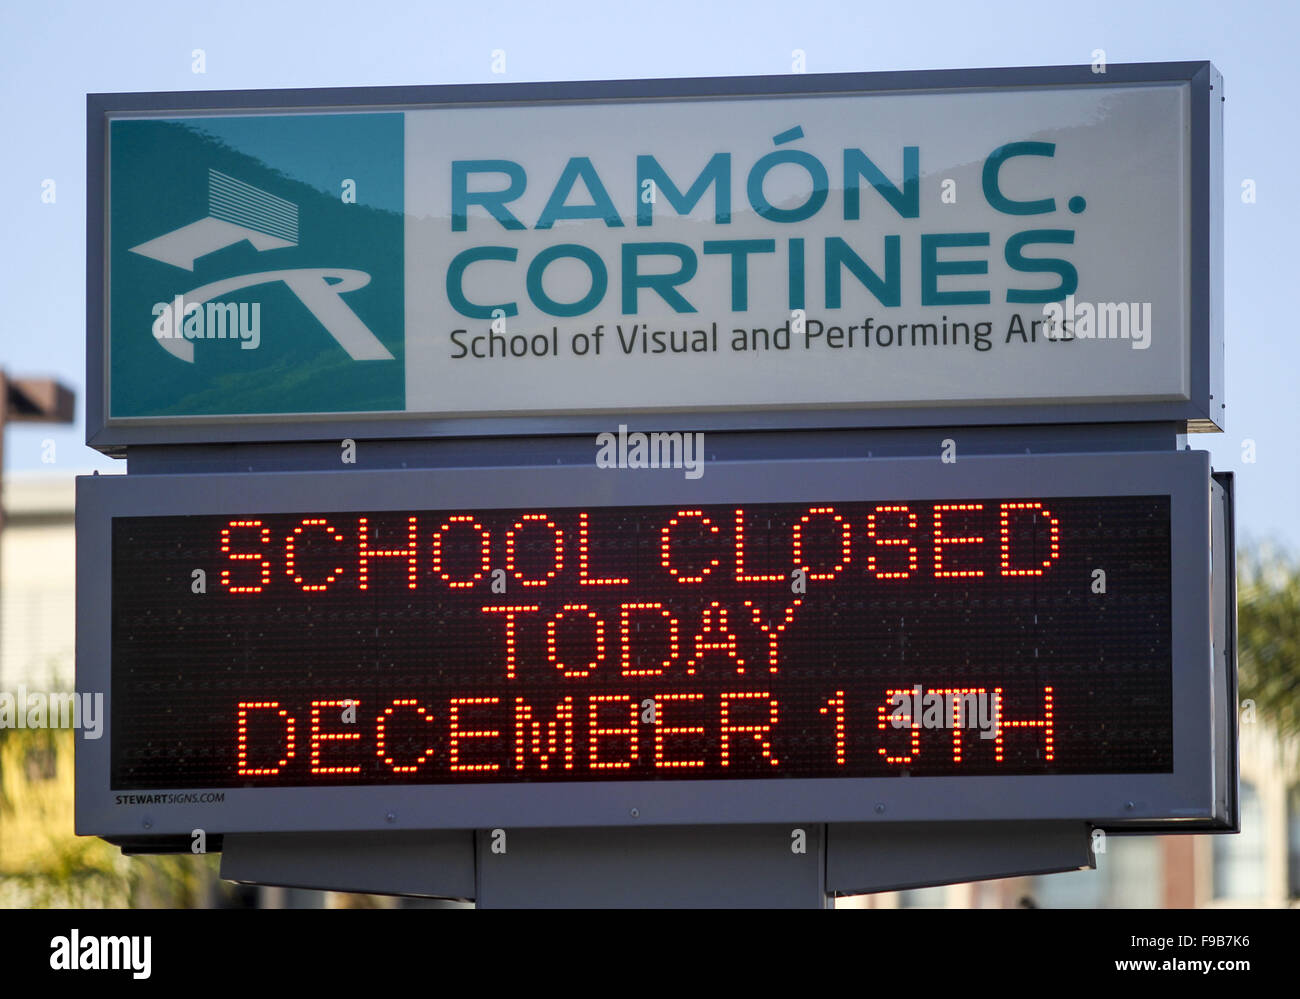 Los Angeles, California, USA. 15th Dec, 2015. A sign shows the school is closed at the Ramon Cortines School of Visual and Performing Arts on Tuesday, December. 15, 2015 in Los Angeles. Responding to an ''electronic threat'' emailed to.multiple members of the school board and campuses, all Los Angeles Unified.School District campuses were closed today and a massive effort began to search.the roughly 900 schools in the district. © Ringo Chiu/ZUMA Wire/Alamy Live News Stock Photo